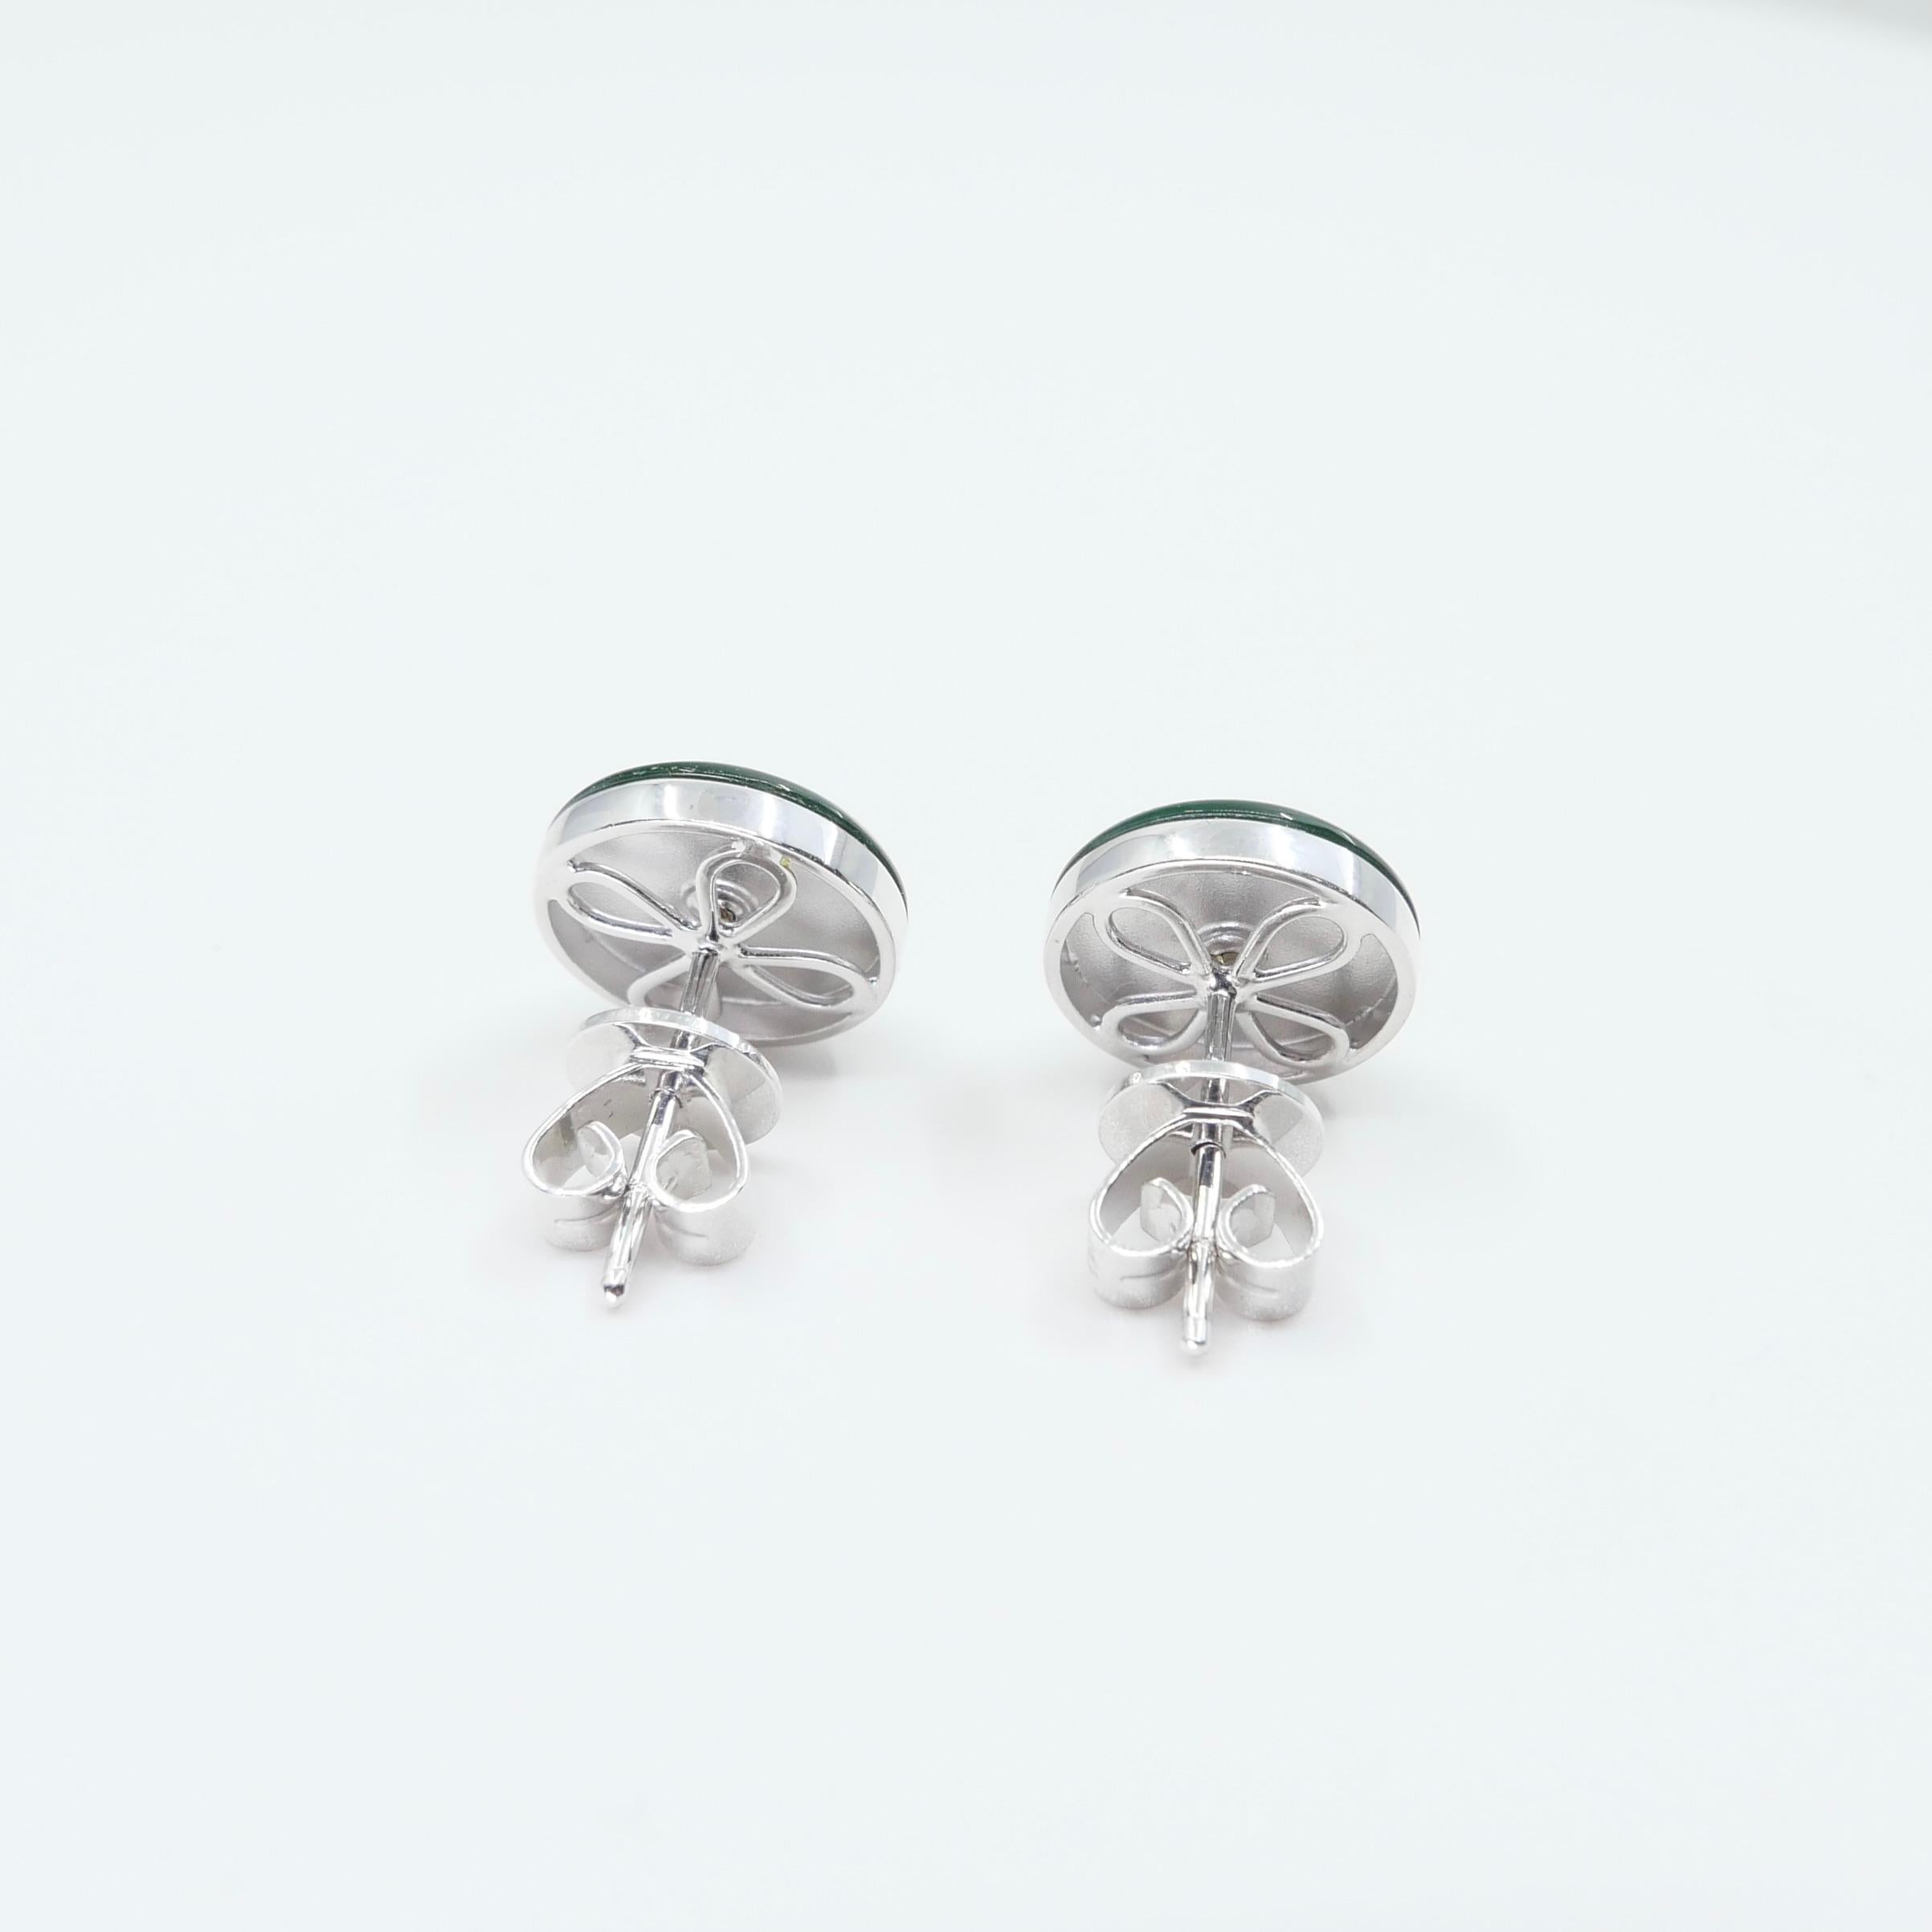 Certified Natural Type A Jadeite Jade And Diamond Earrings. Imperial Green Color For Sale 7